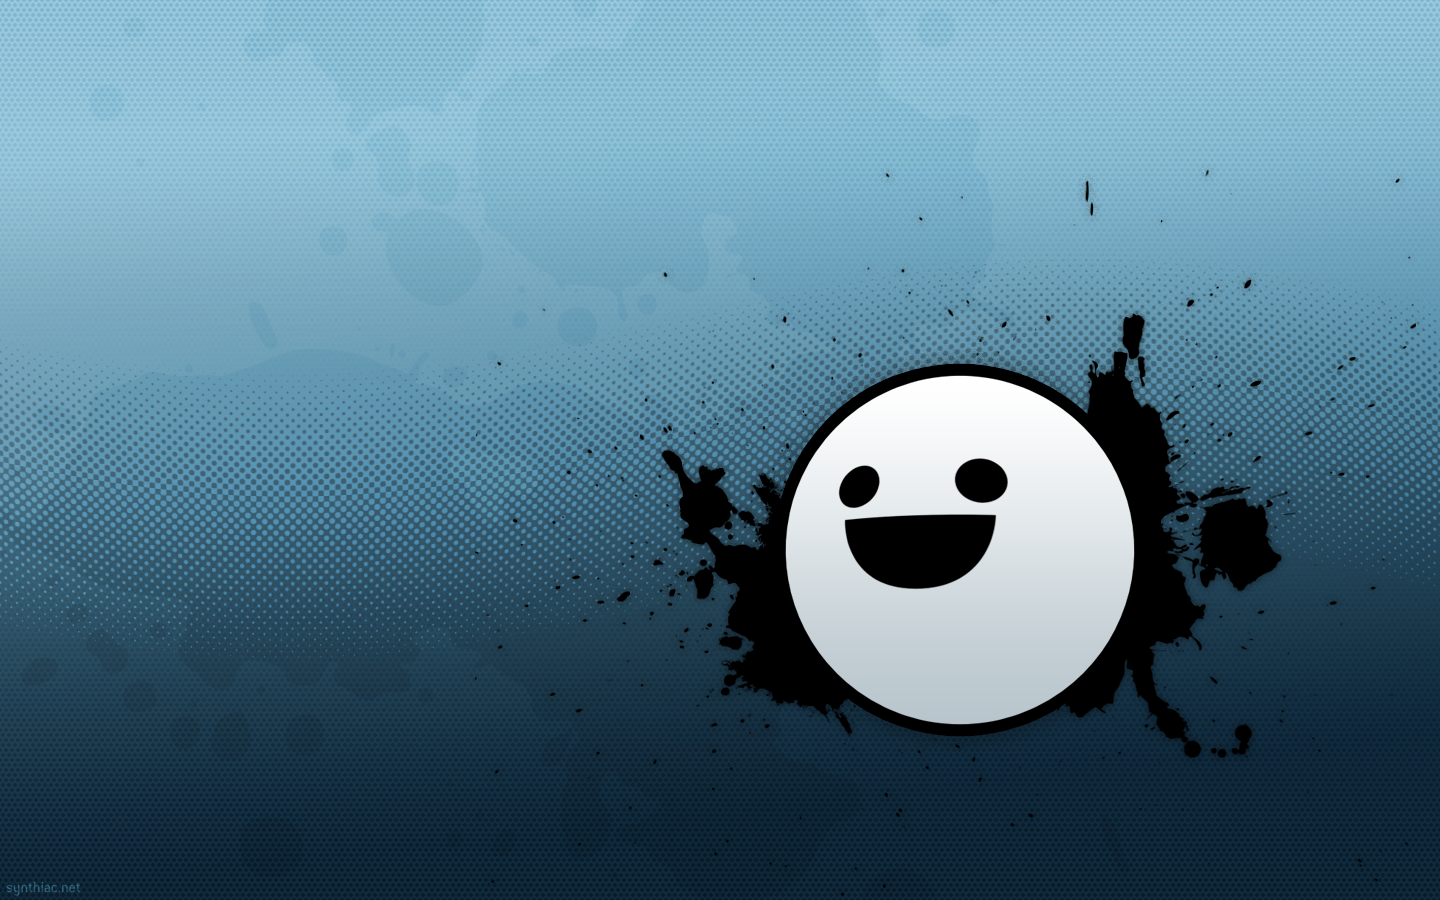 Awesome Smiley Face Wallpaper HD Gallery